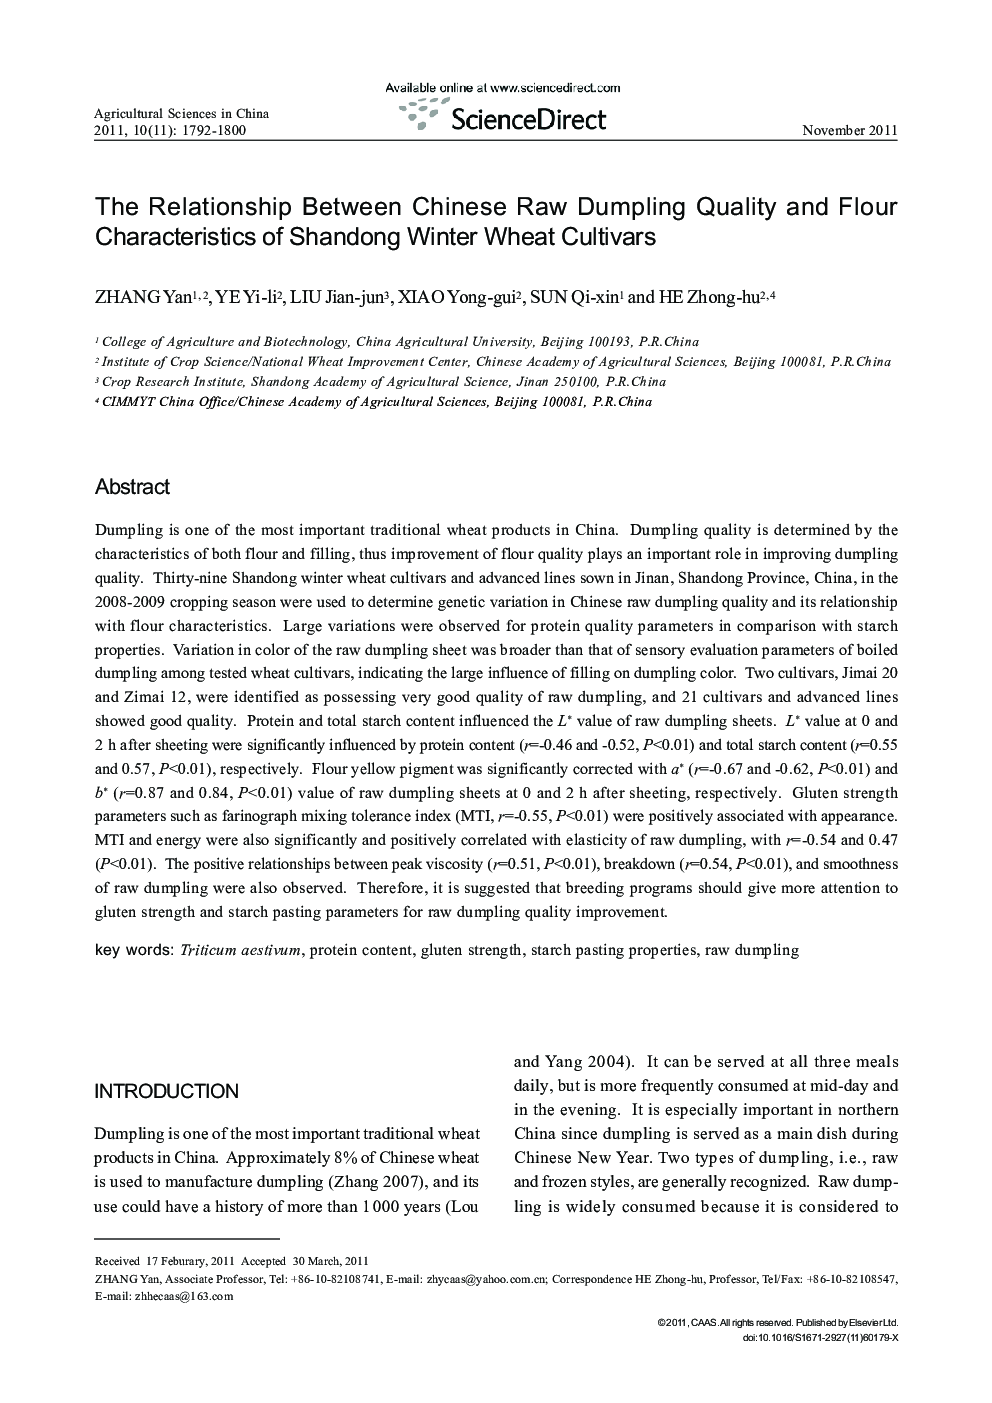 The Relationship Between Chinese Raw Dumpling Quality and Flour Characteristics of Shandong Winter Wheat Cultivars